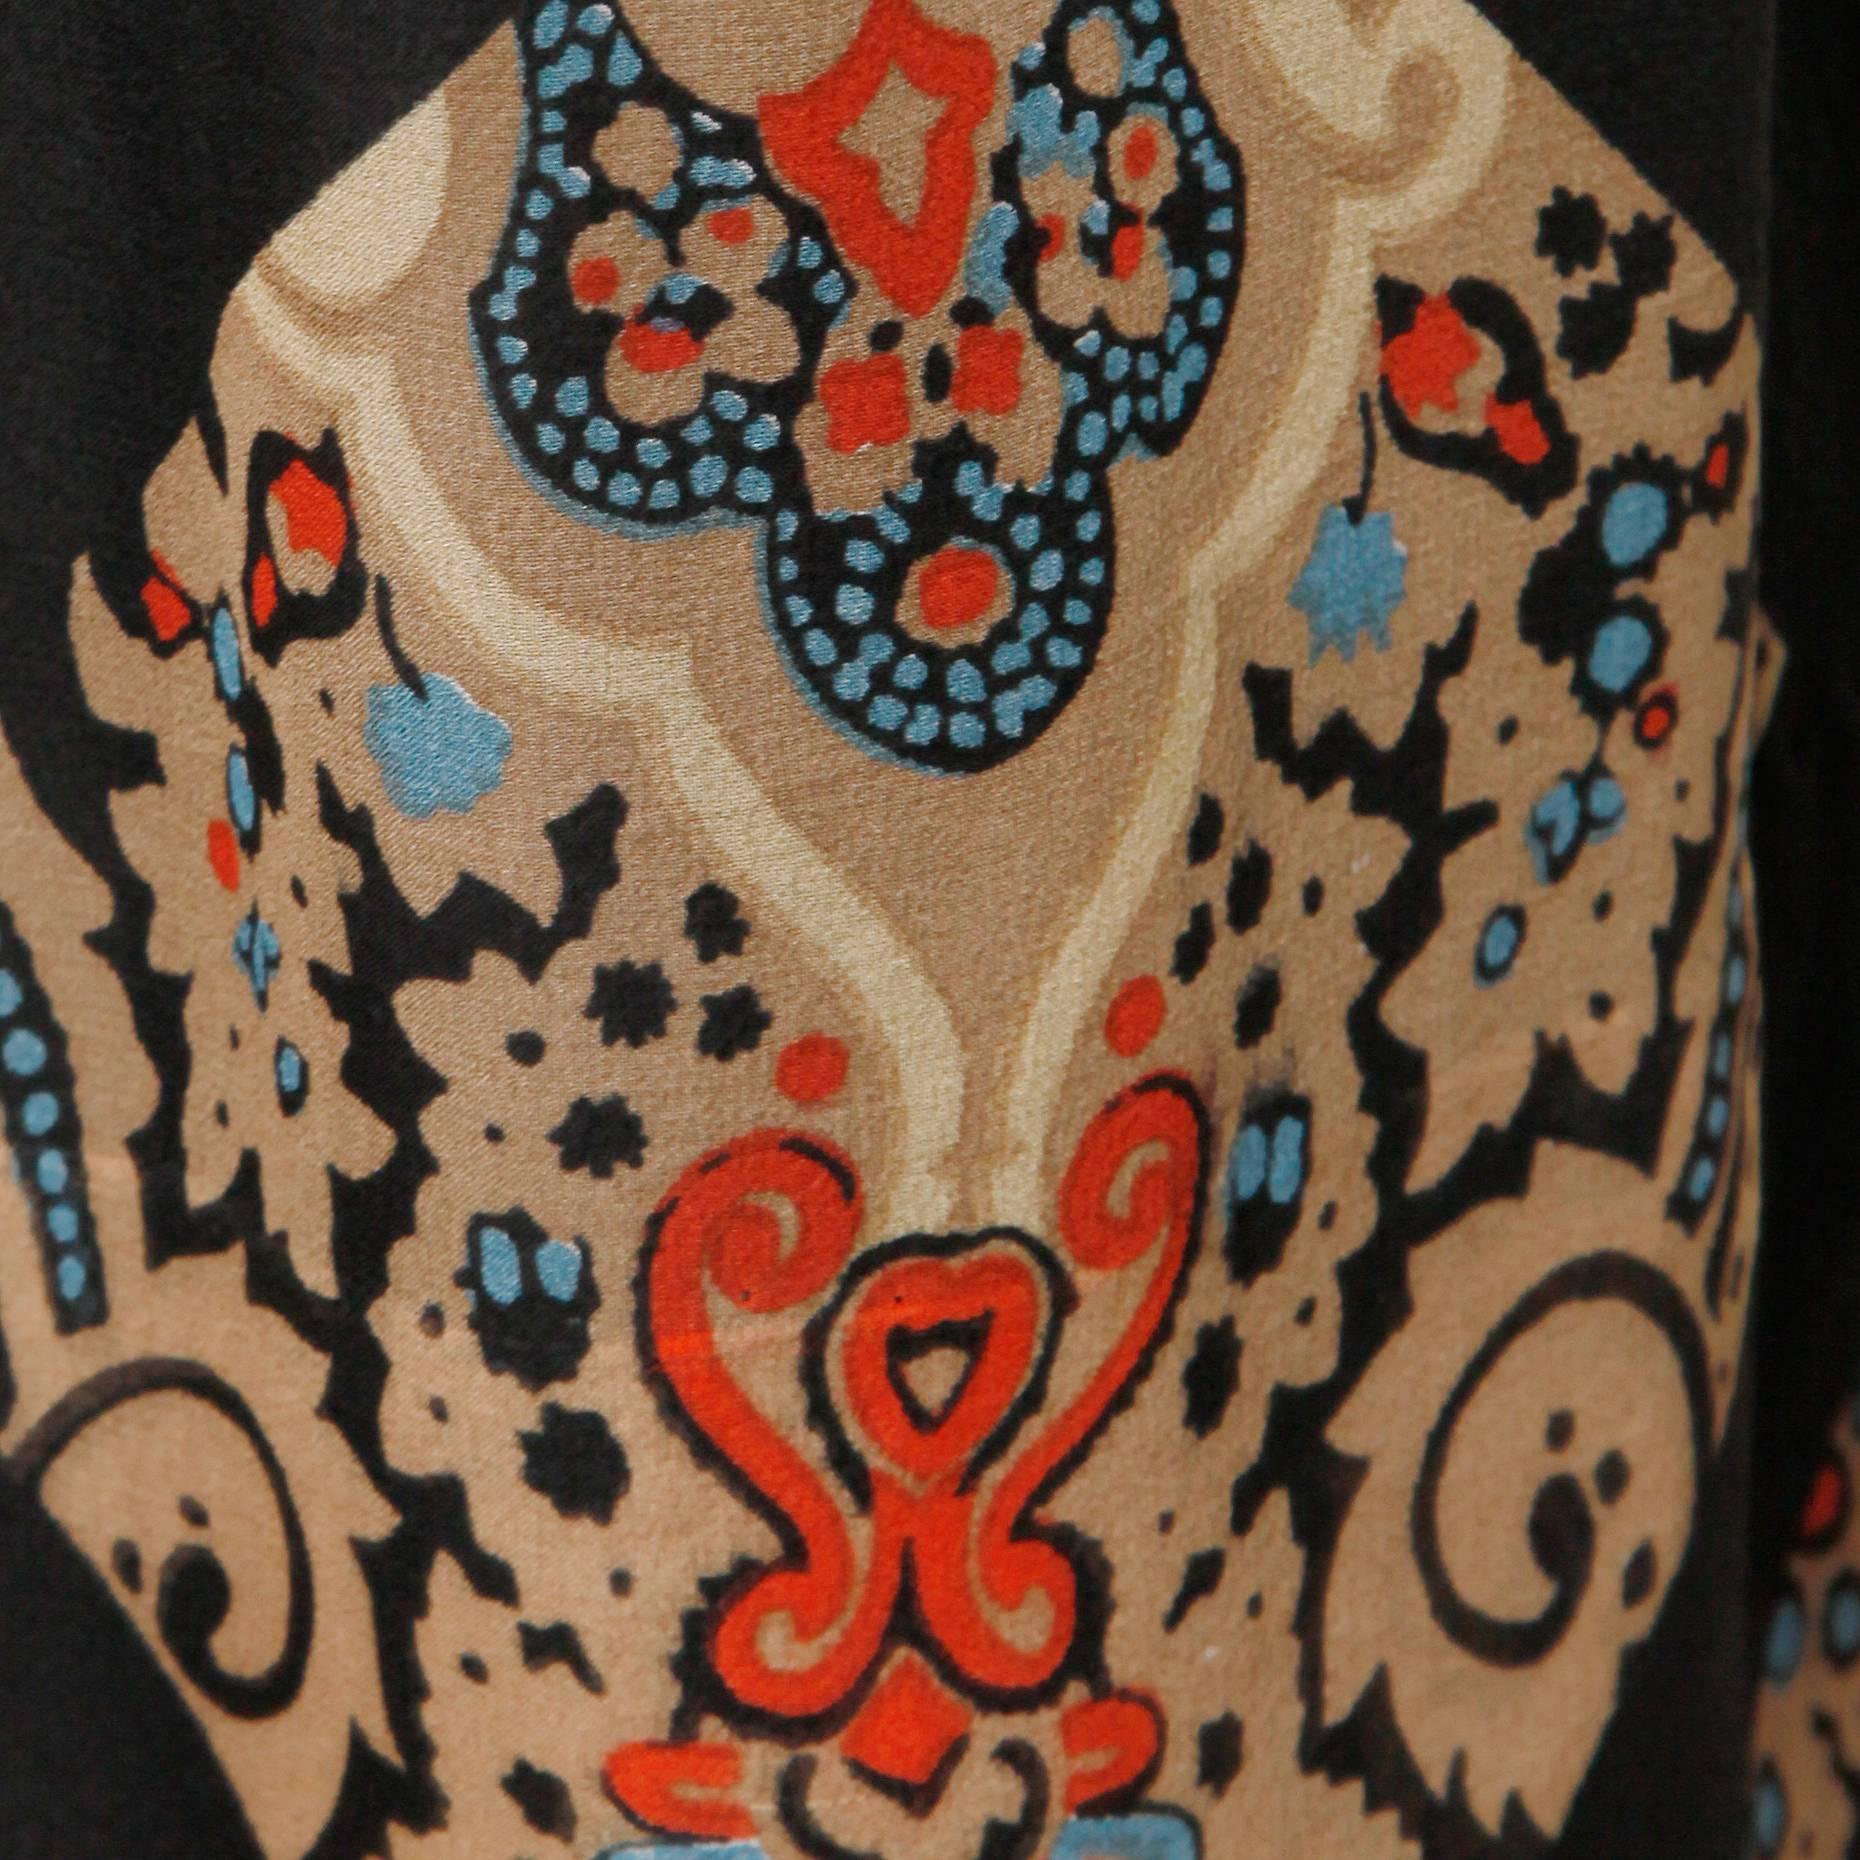 Darling vibrant printed silk dress by Oscar de la Renta with an ascot neck tie and long sheer sleeves. Gorgeous vintage print in black, taupe, red and blue. Rear zip and hook closure. Partially lined. Marked size is a US 8, but it fits more like a